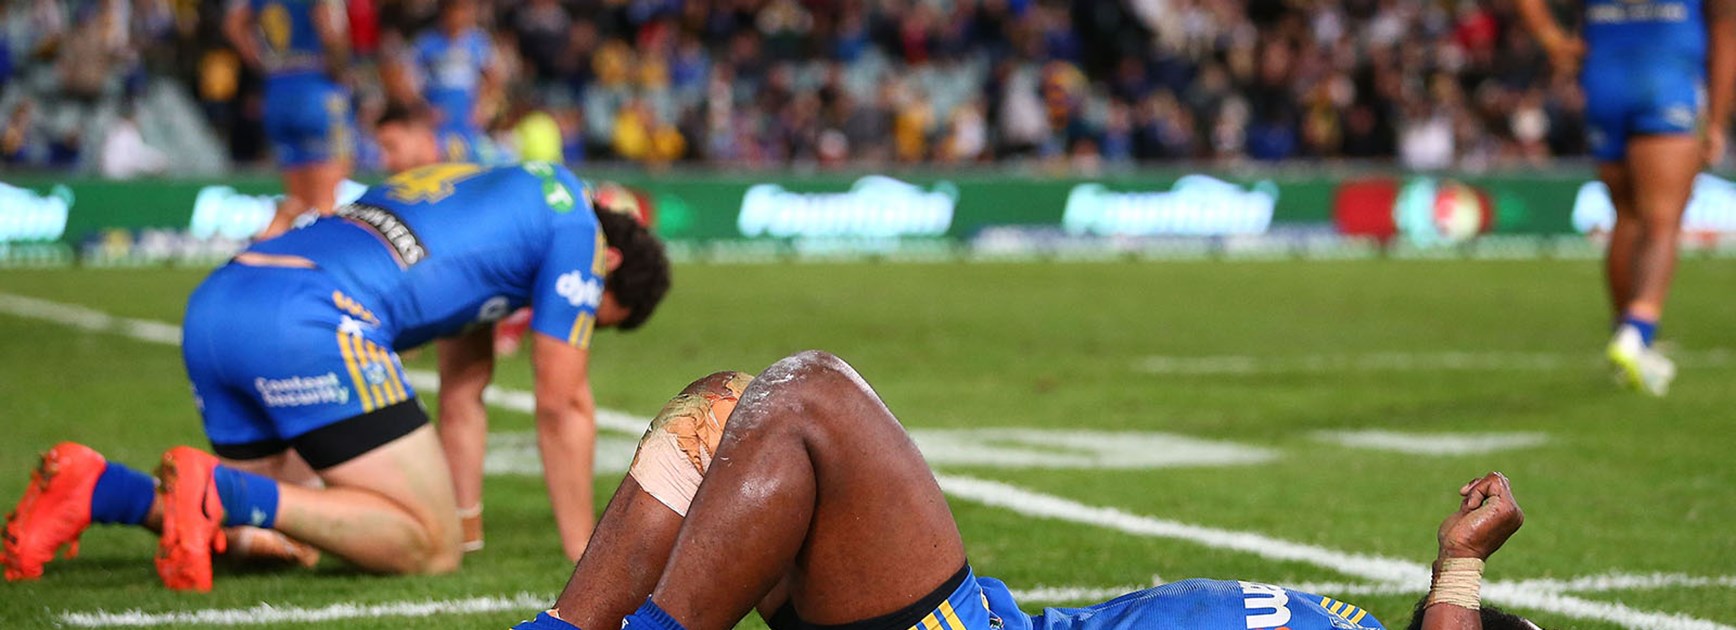 Parramatta players sprawled across Pirtek Stadium after throwing away a 24 point lead against the Cowboys in Round 13.